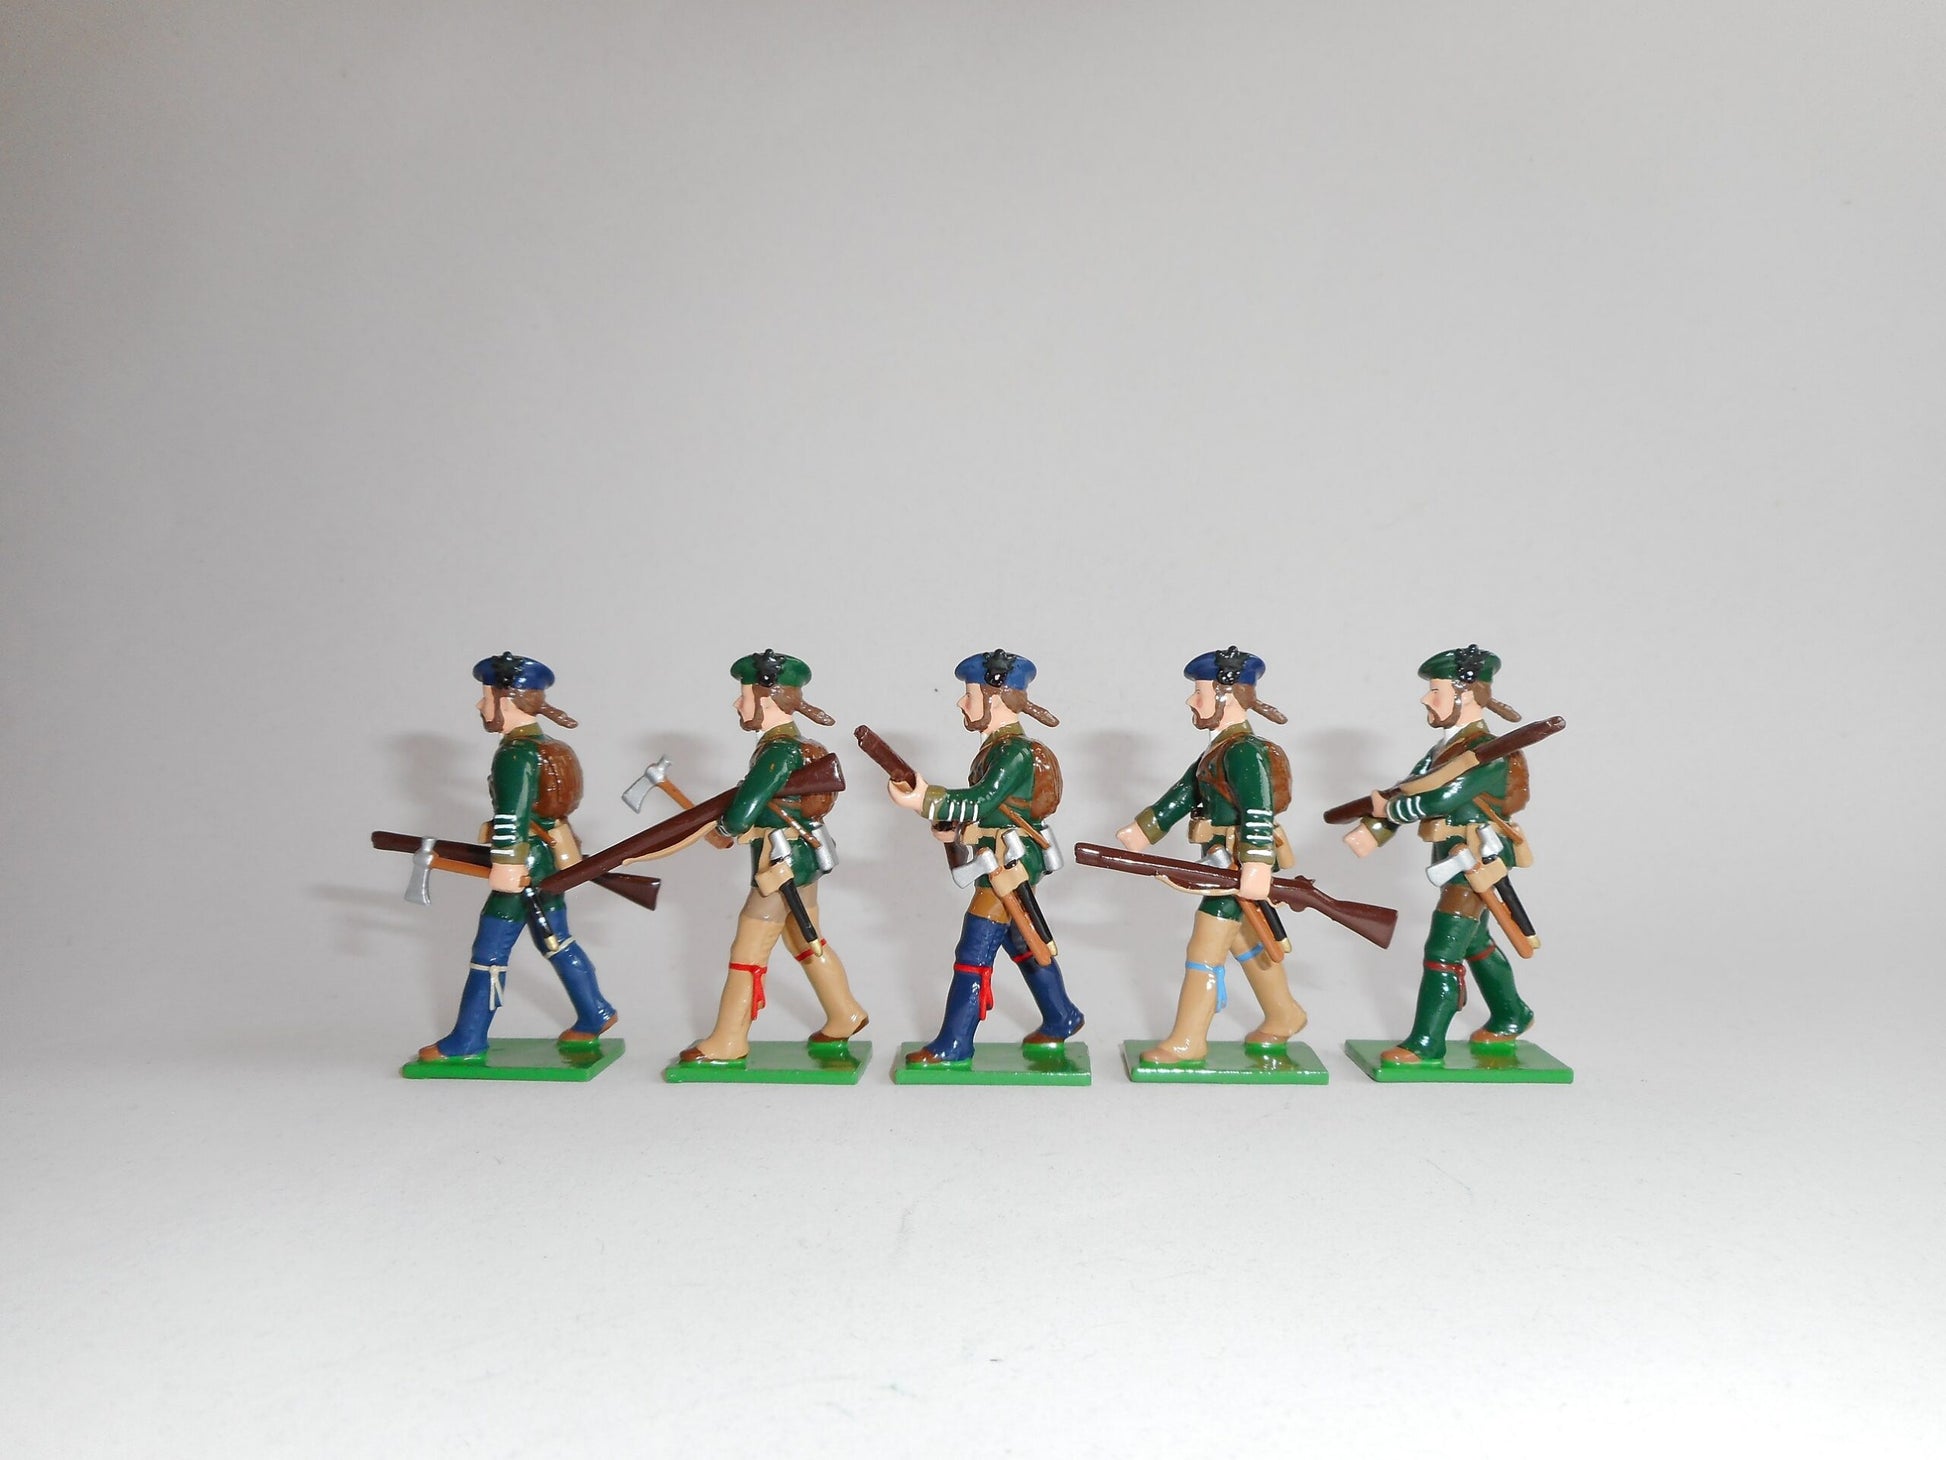 Side view of Collectible toy soldier miniature army men Rogers' Rangers figurines.